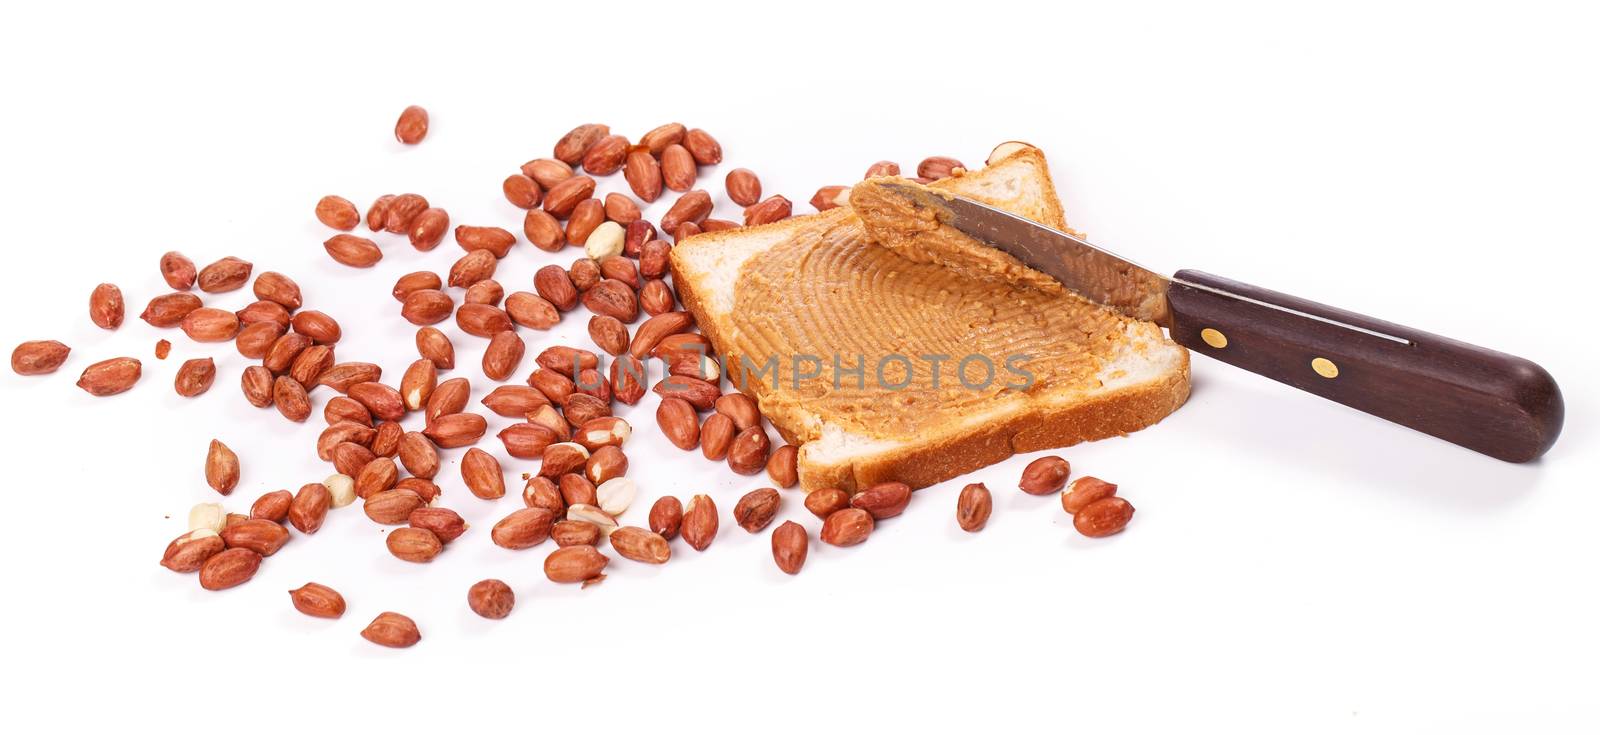 Peanut butter with heap of peanuts on the table